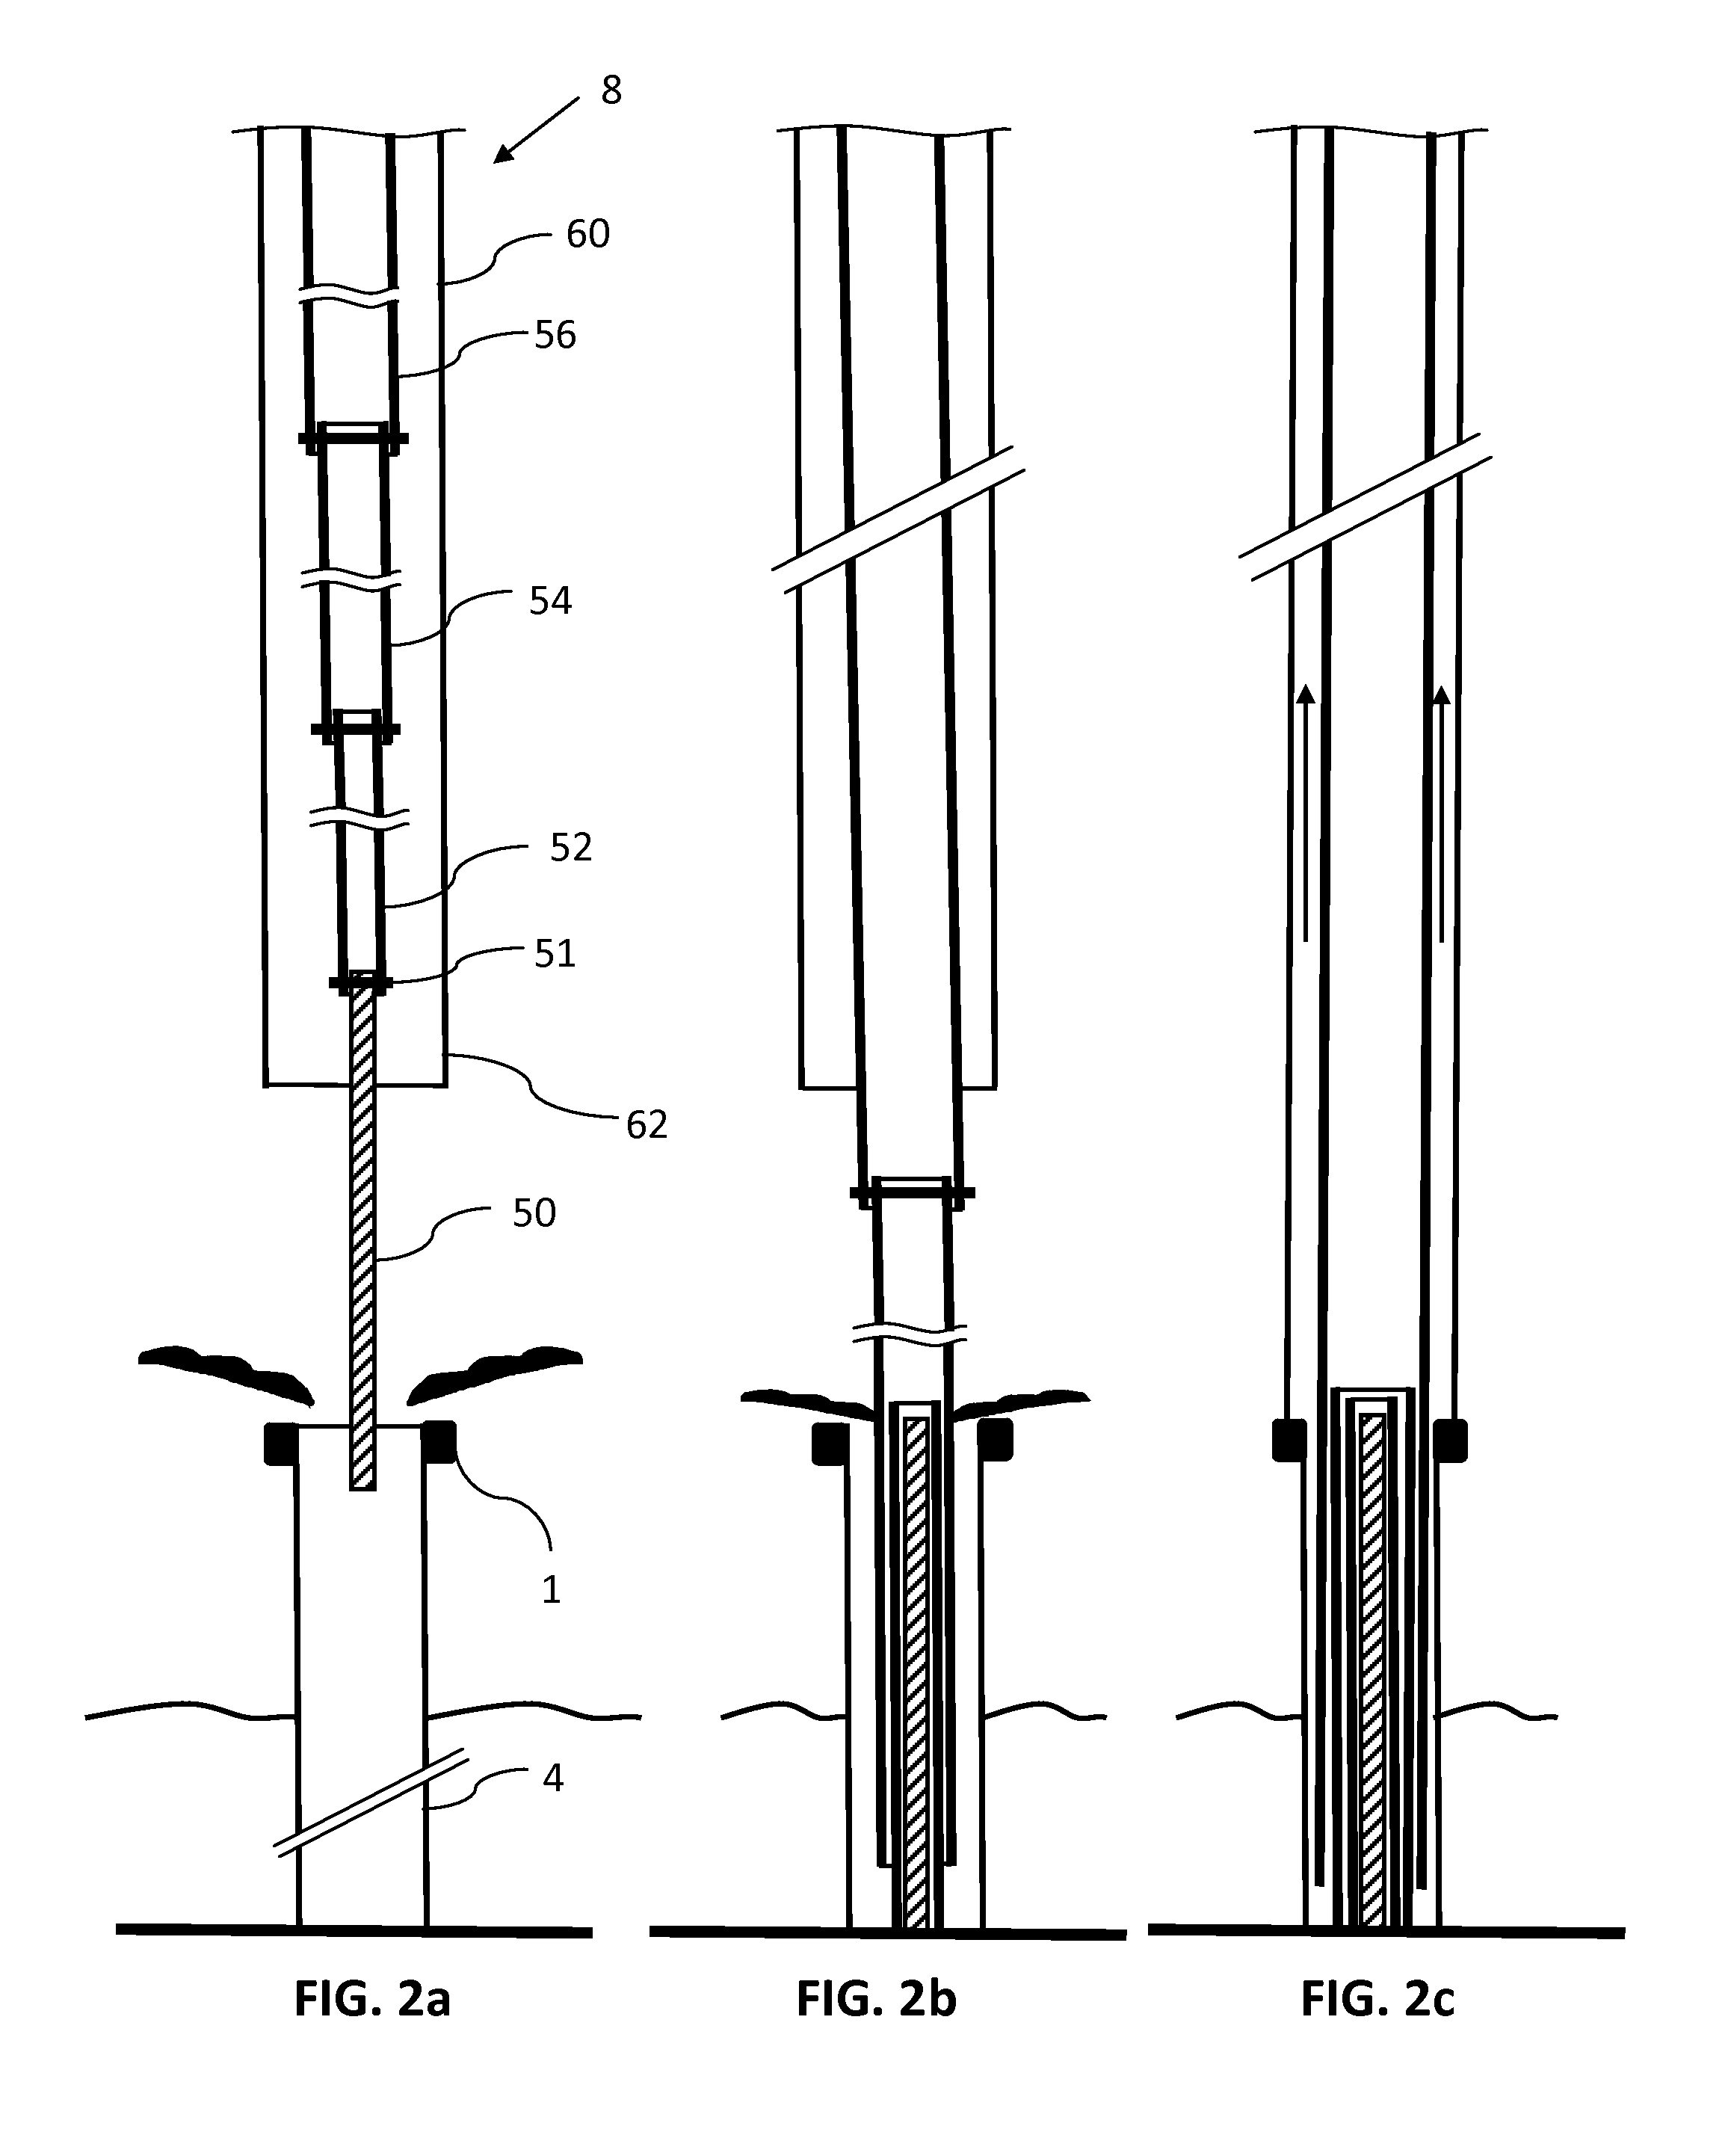 Methods and devices for restoring control and resuming production at an offshore oil well following an uncontrolled fluid release after an explosion